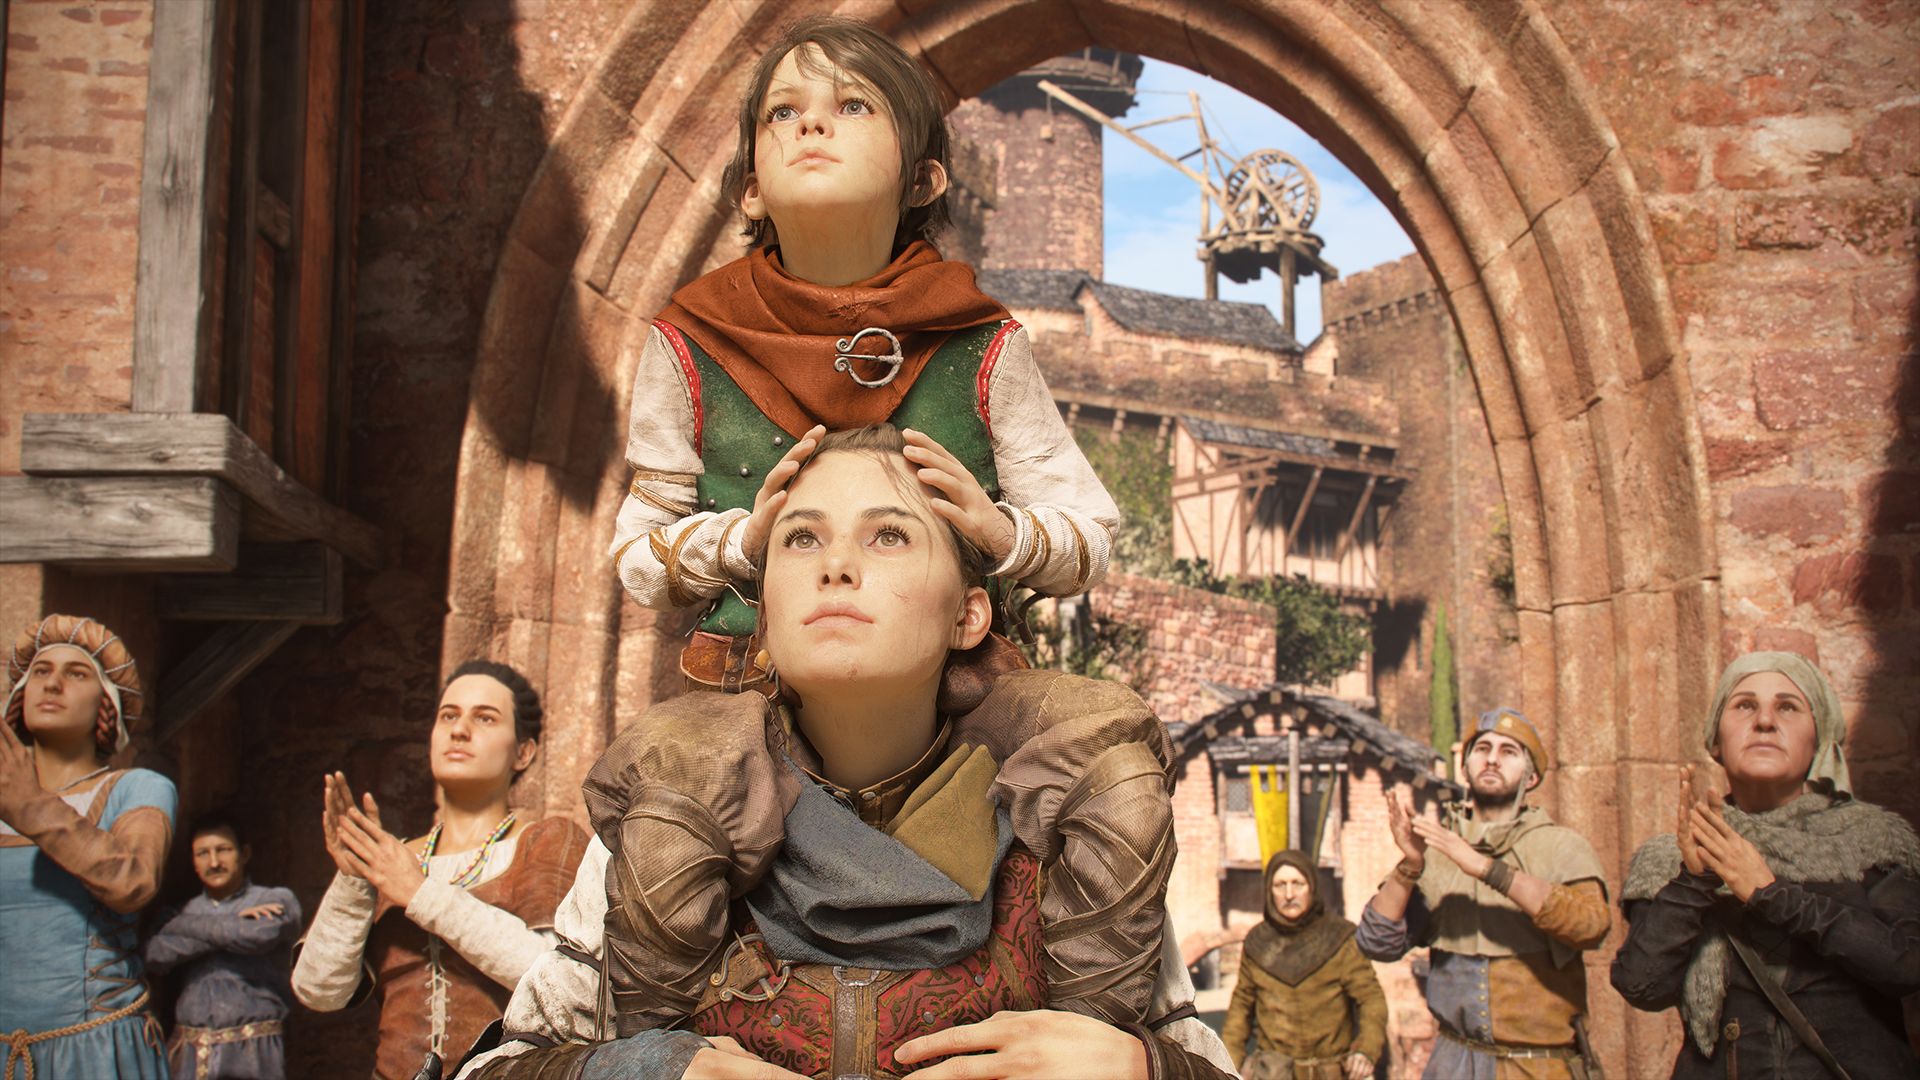 A Plague Tale Innocence not on xBox Game Pass anymore…? : r